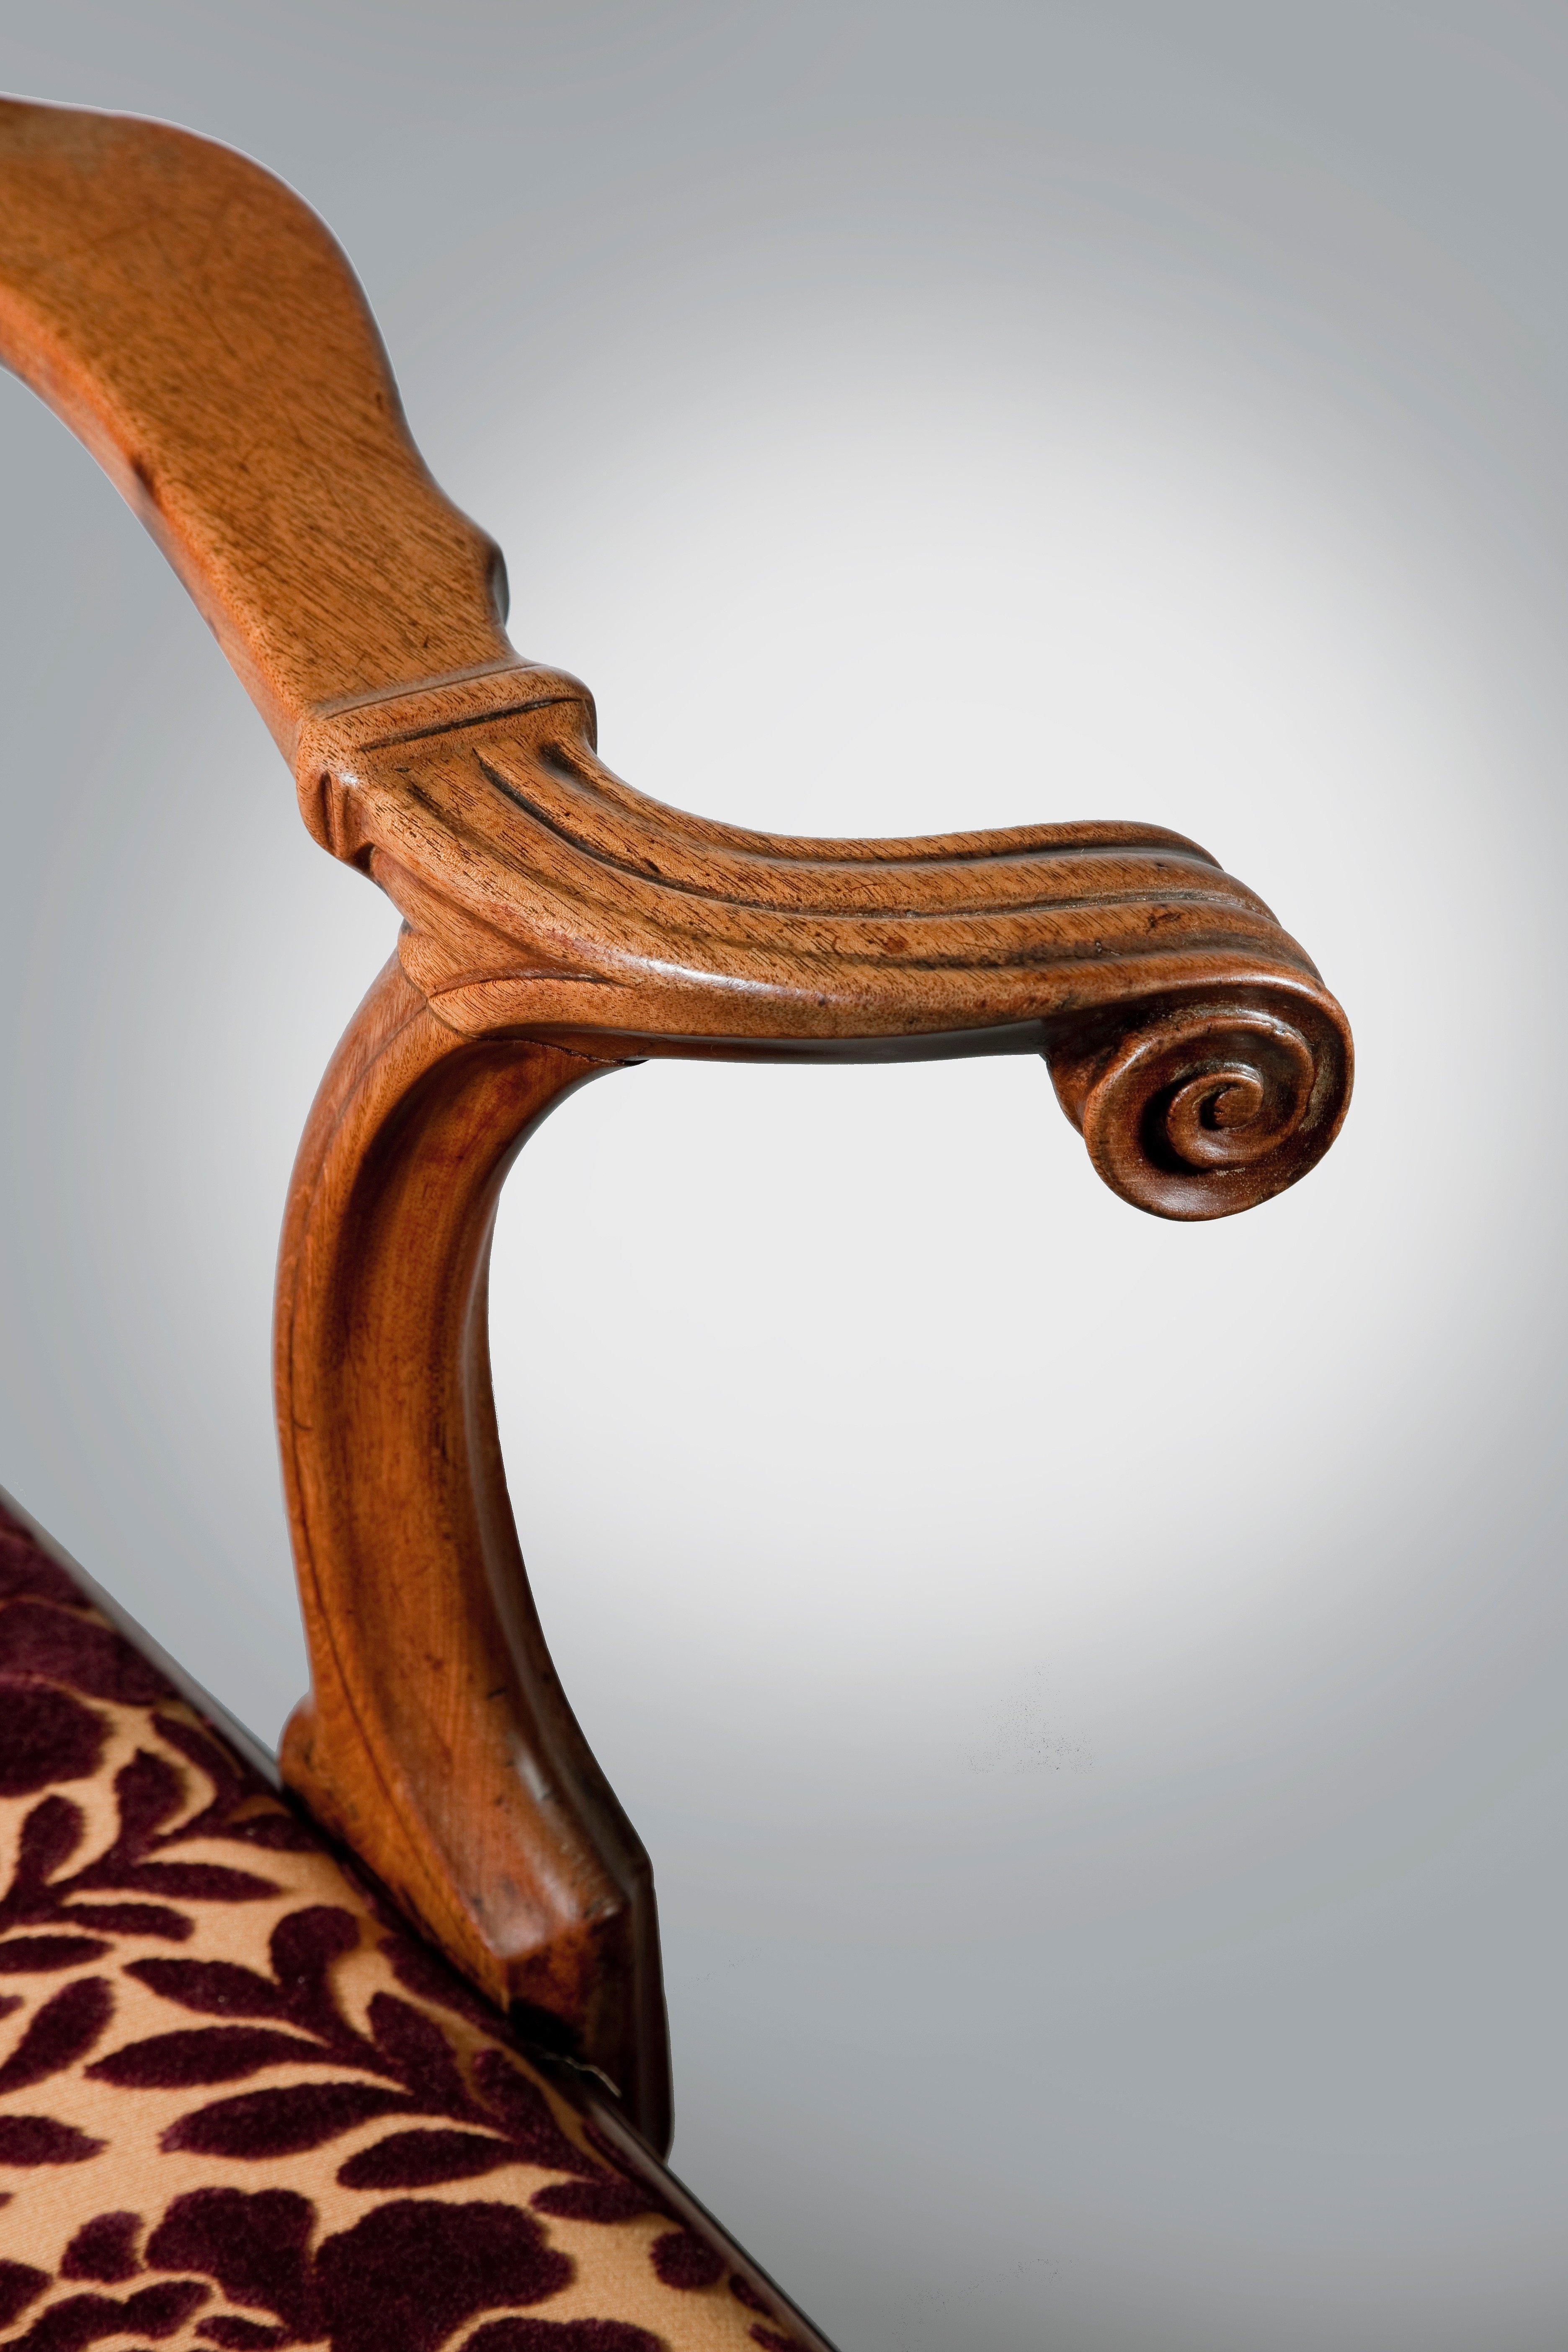 A George II period mahogany open armchair in the manner of Giles Grendey, with unusual outswept scroll and cuff arms, nicely scribed detail to the back and gently swept crest rail terminating in scroll ears. It is a wonderfully drawn, well